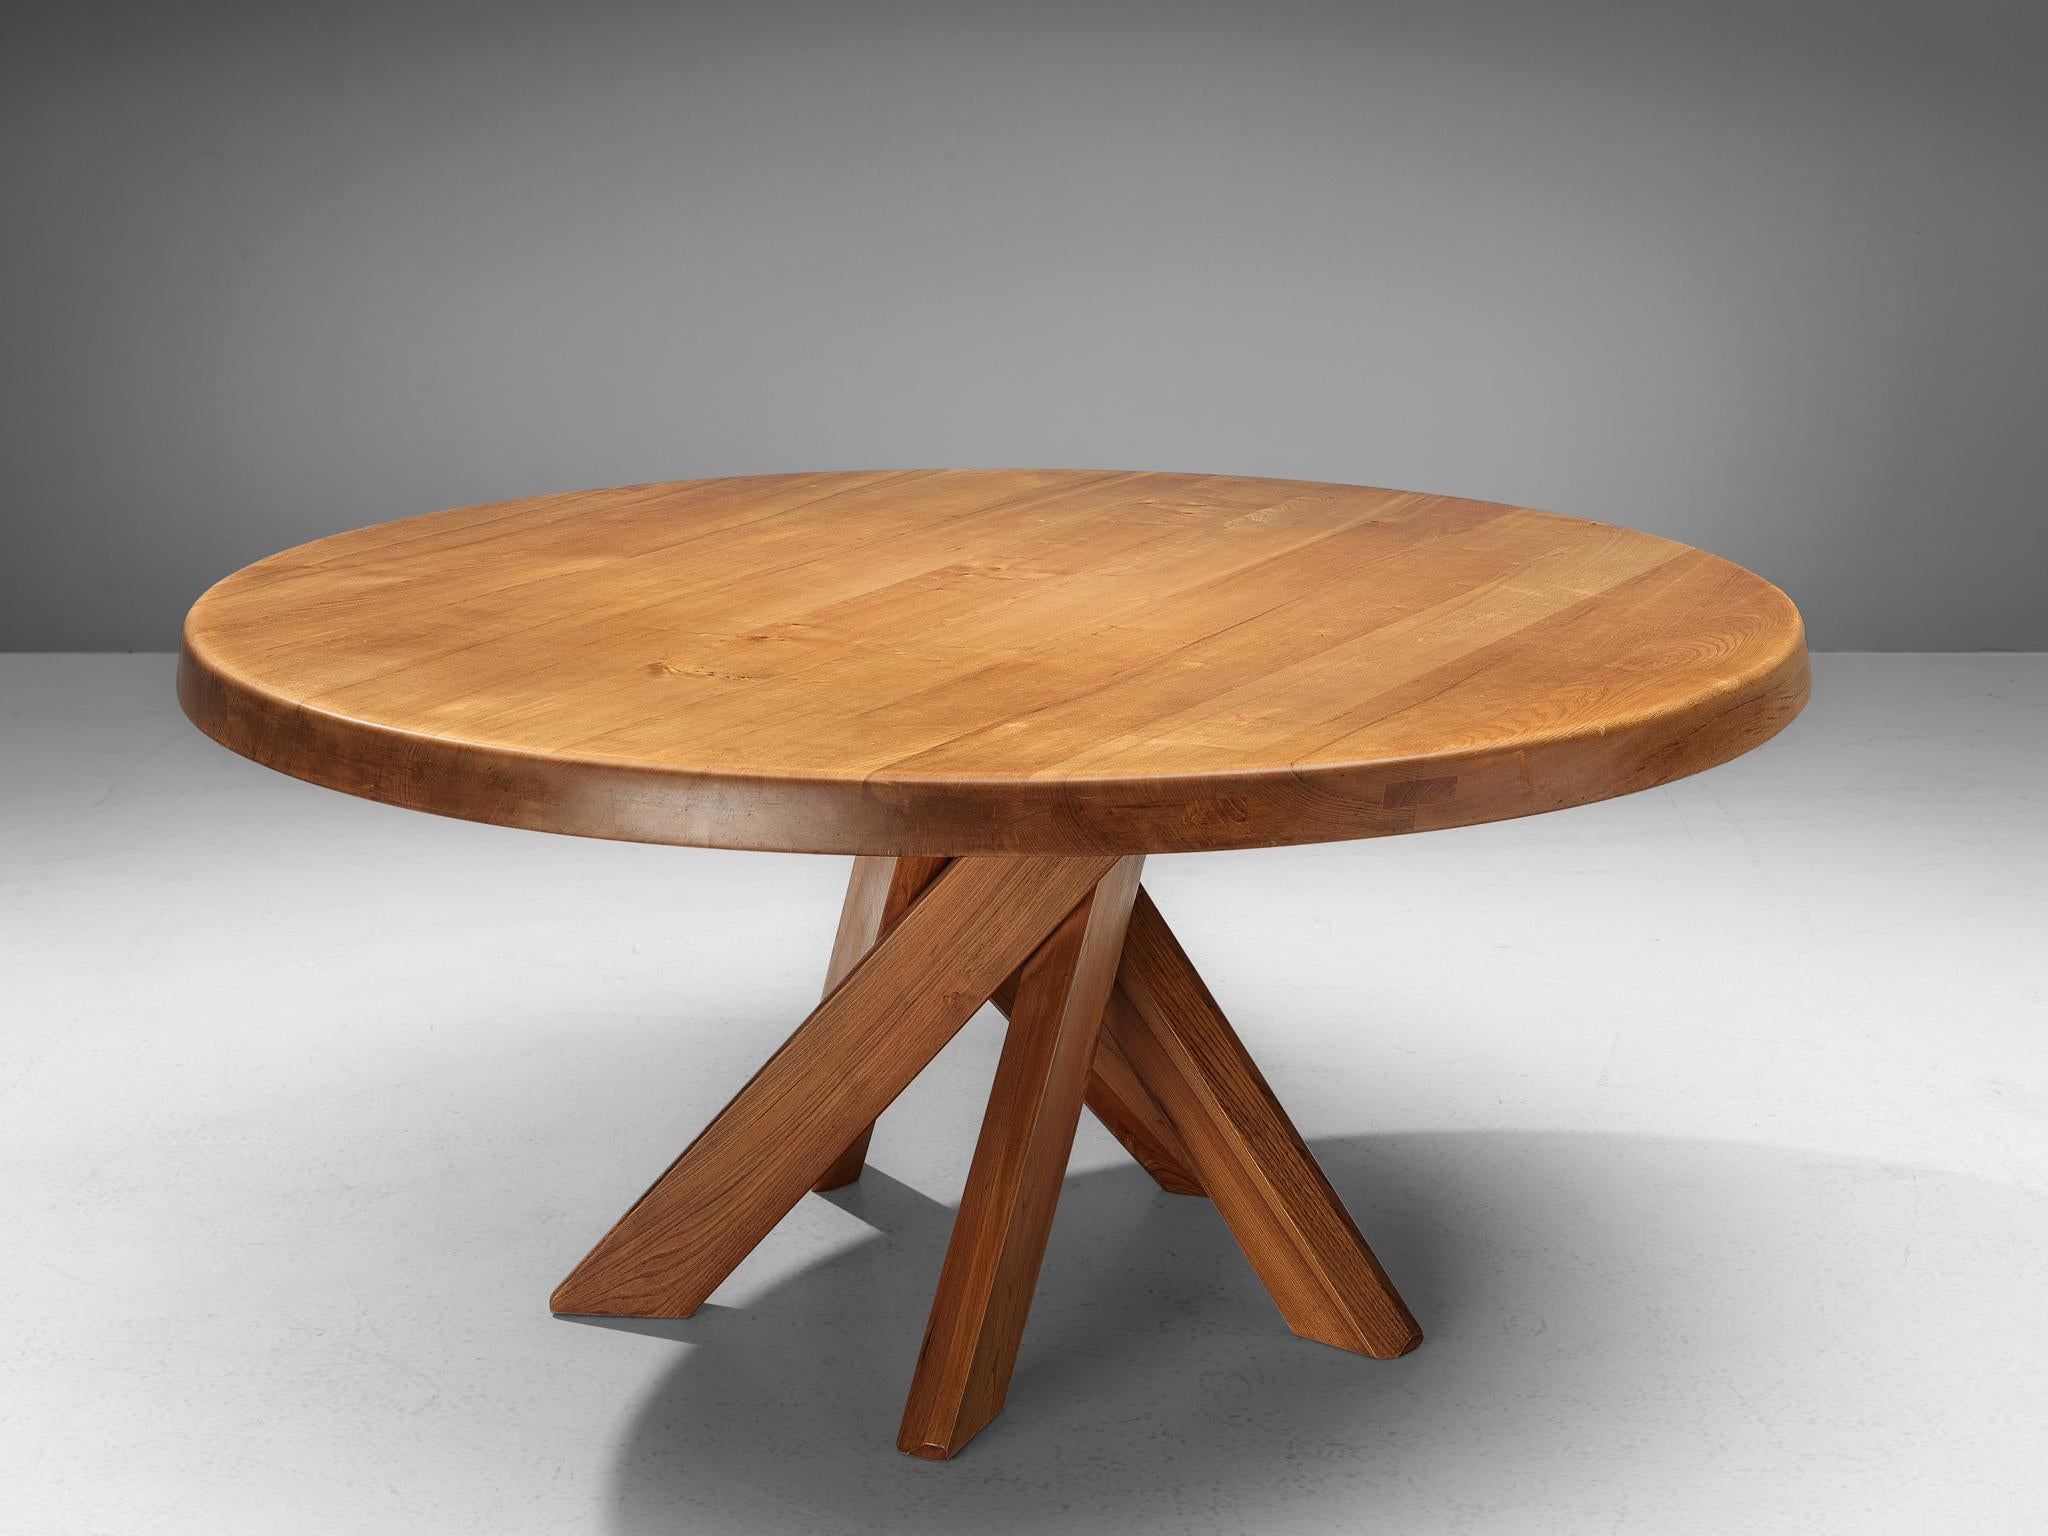 Pierre Chapo, T21E 'Sfax' dining table, elm, France, 1960s. Measures: Diameter 160cm/63in.

This round dining table is designed by Pierre Chapo. The shape of the base creates a very dynamic look. The perfectly made solid wood joints, also shown on